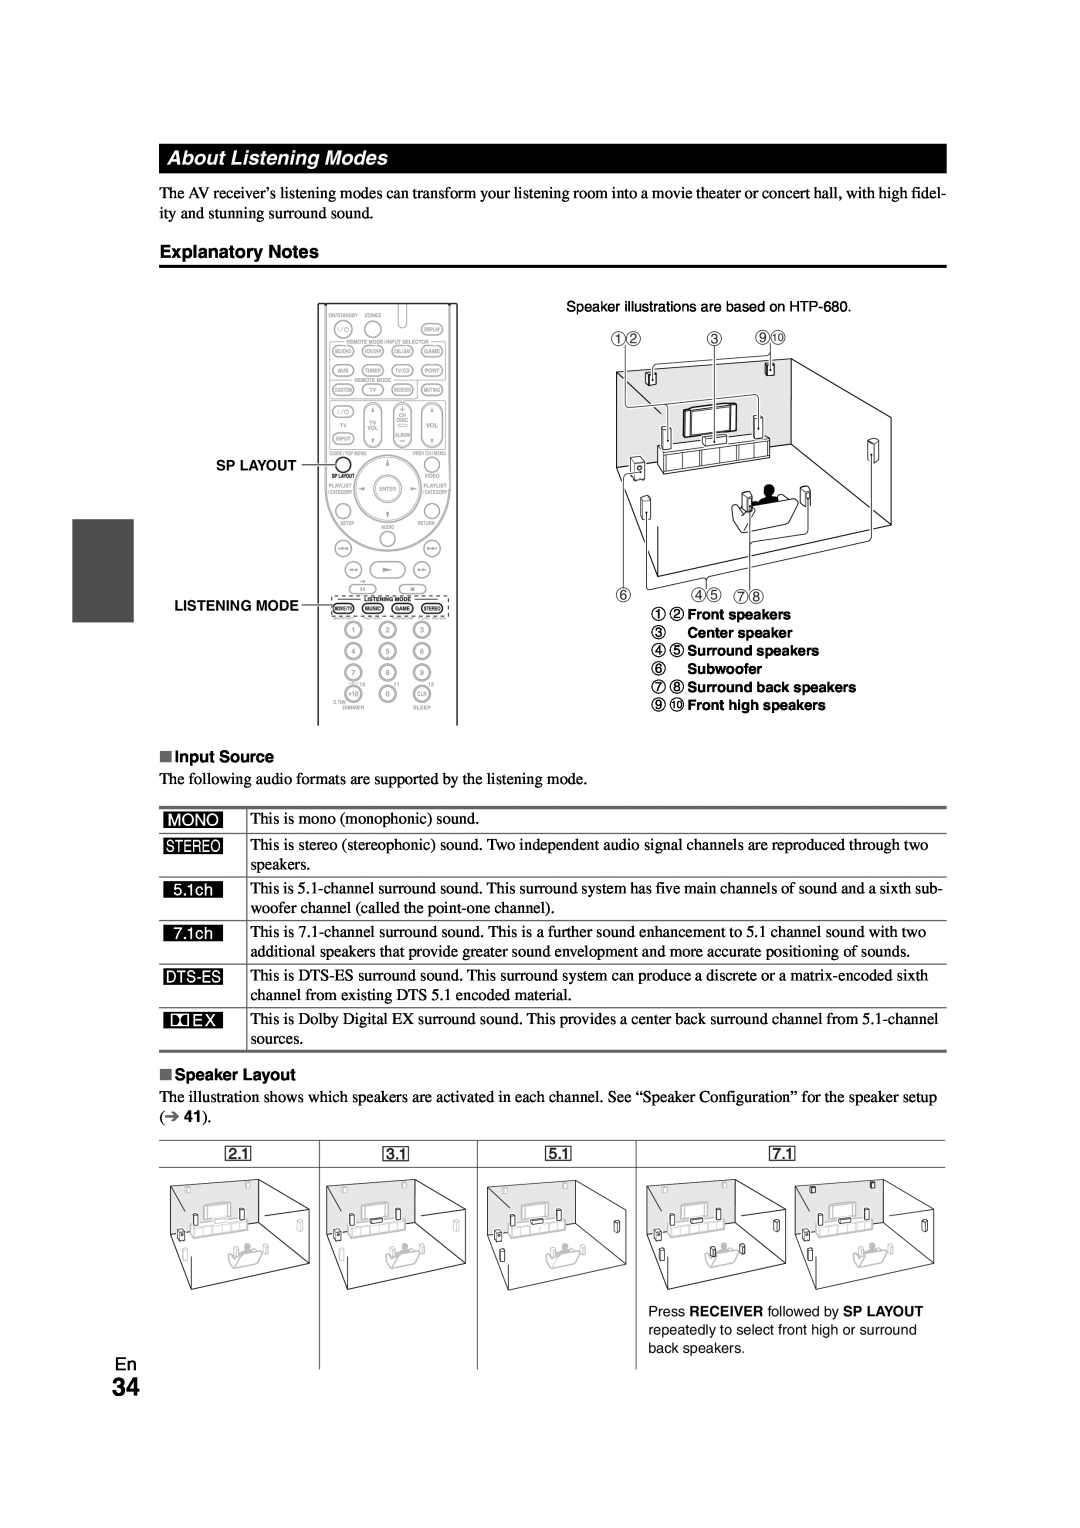 Onkyo HT-S7300 instruction manual About Listening Modes, Explanatory Notes, Input Source, Speaker Layout 